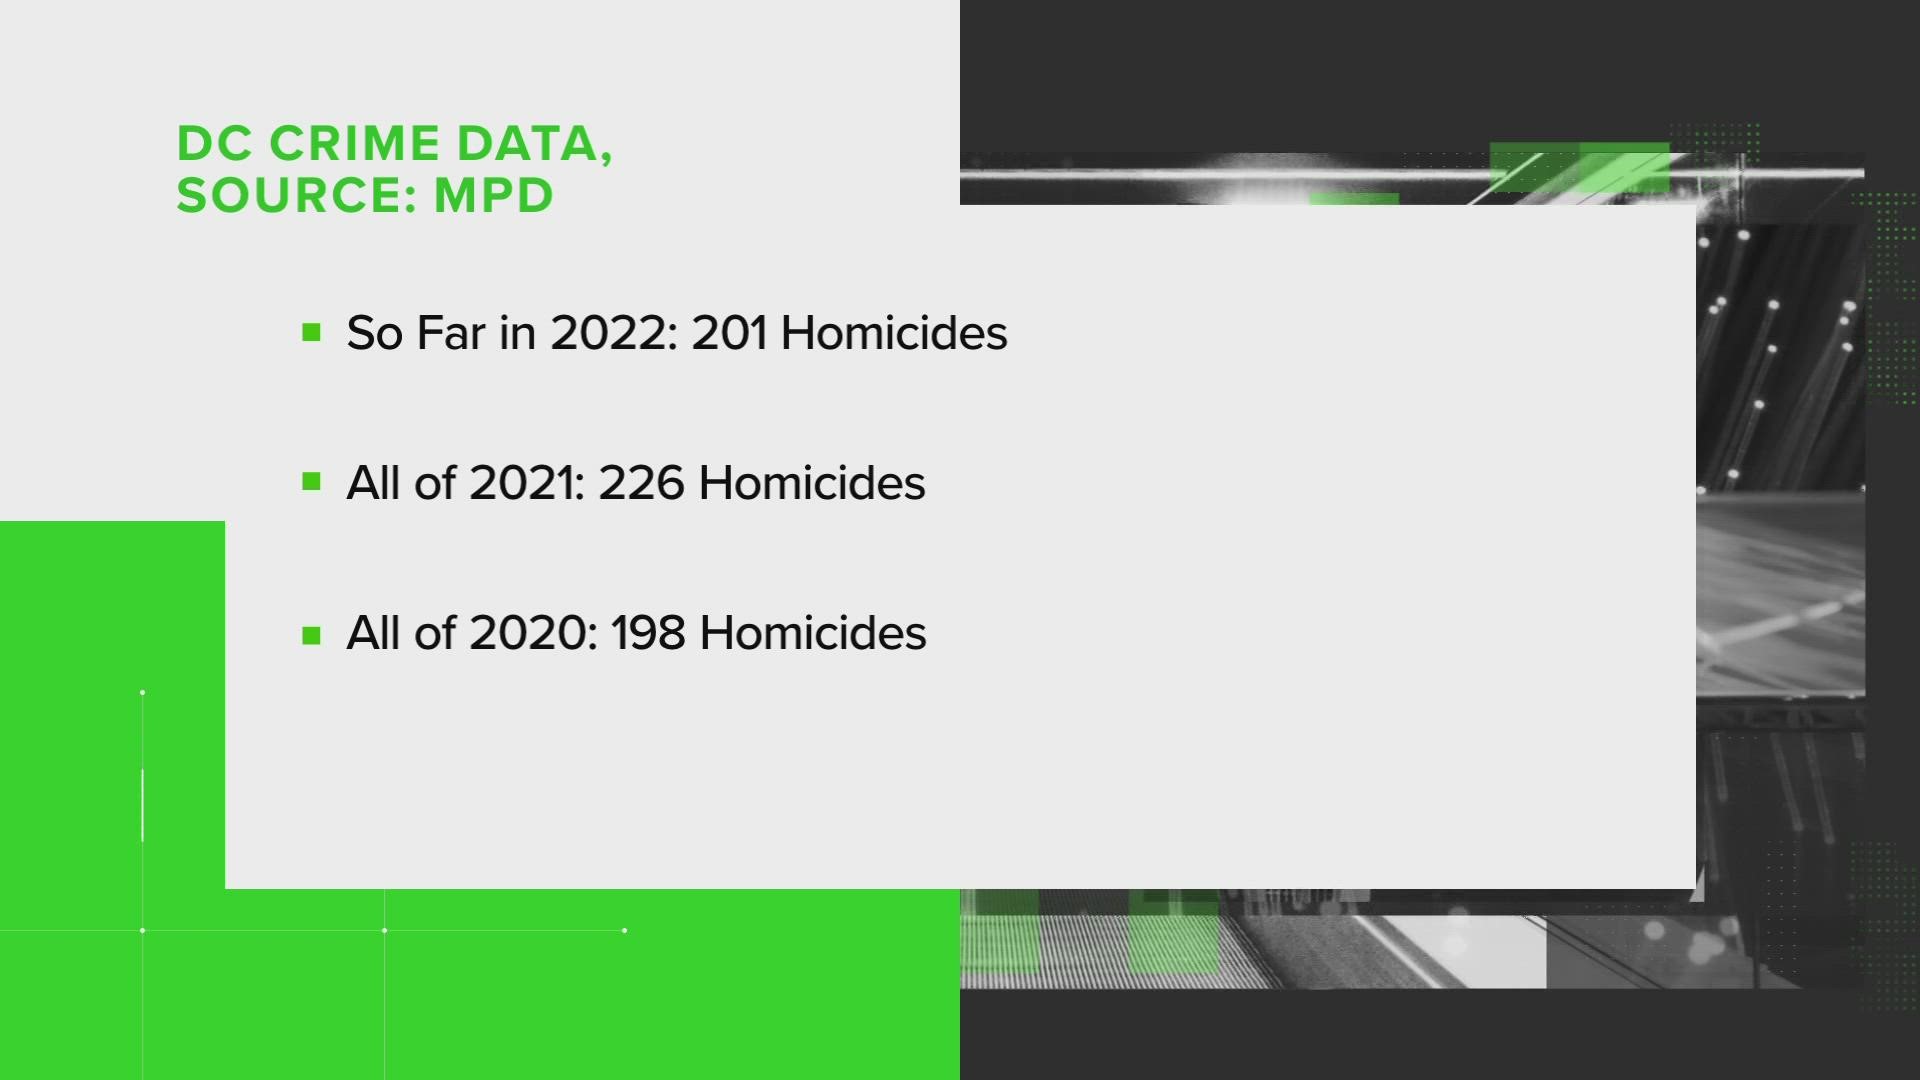 Right now, the website lists 199 homicides for 2022 in D.C. But Police confirmed to WUSA9 that two shootings in Anacostia and Northeast were numbers 200 and 201.